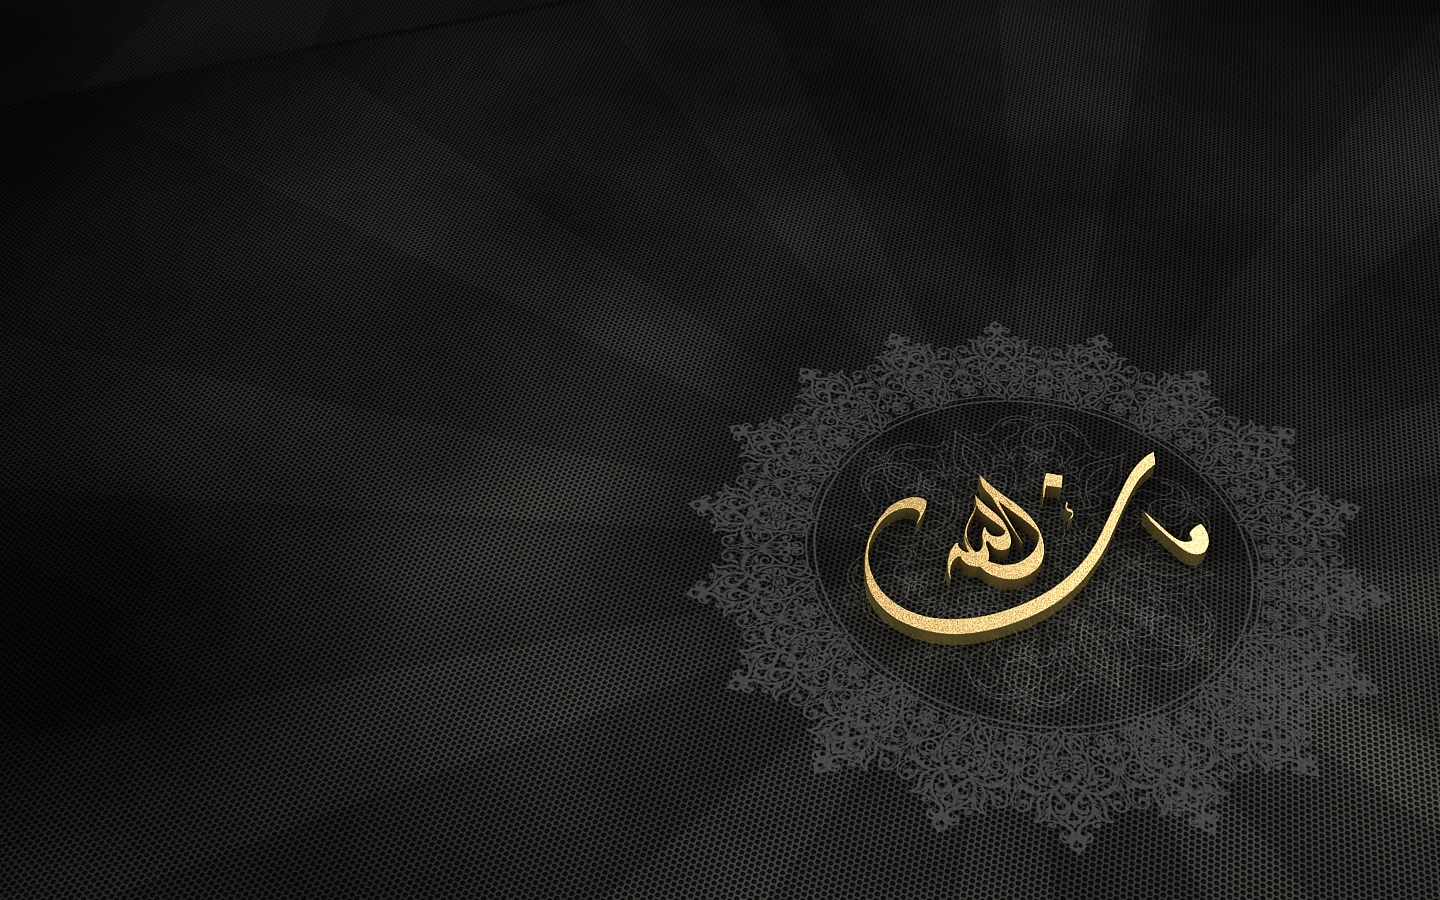 3D Islamic Wallpapers, Round Two! - Top Islamic Blog!